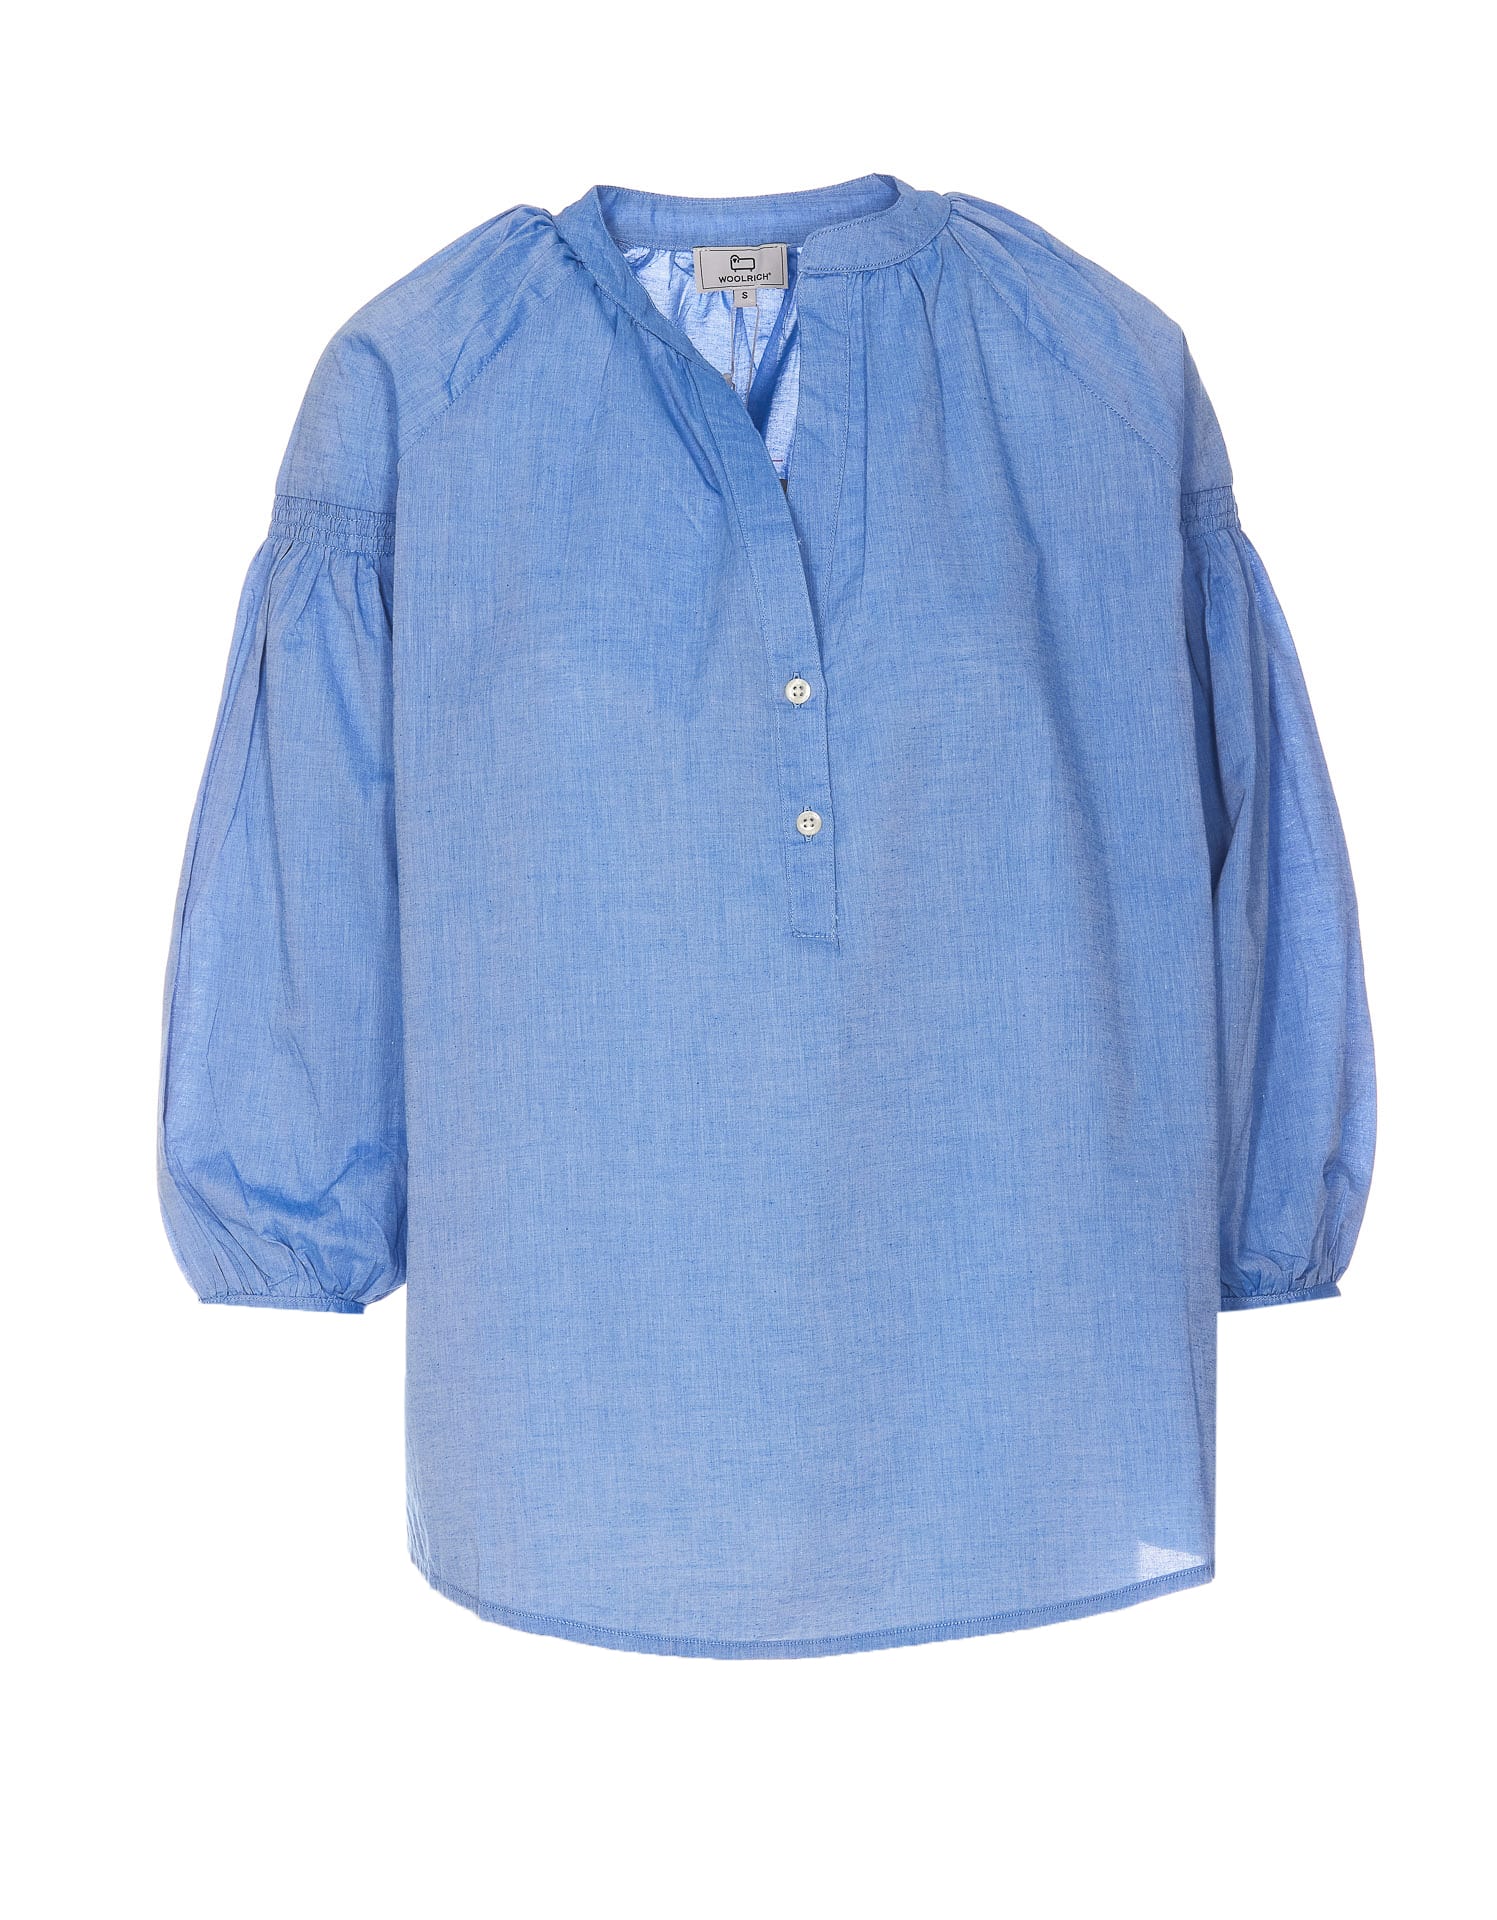 WOOLRICH CHAMBRAY BLOUSE